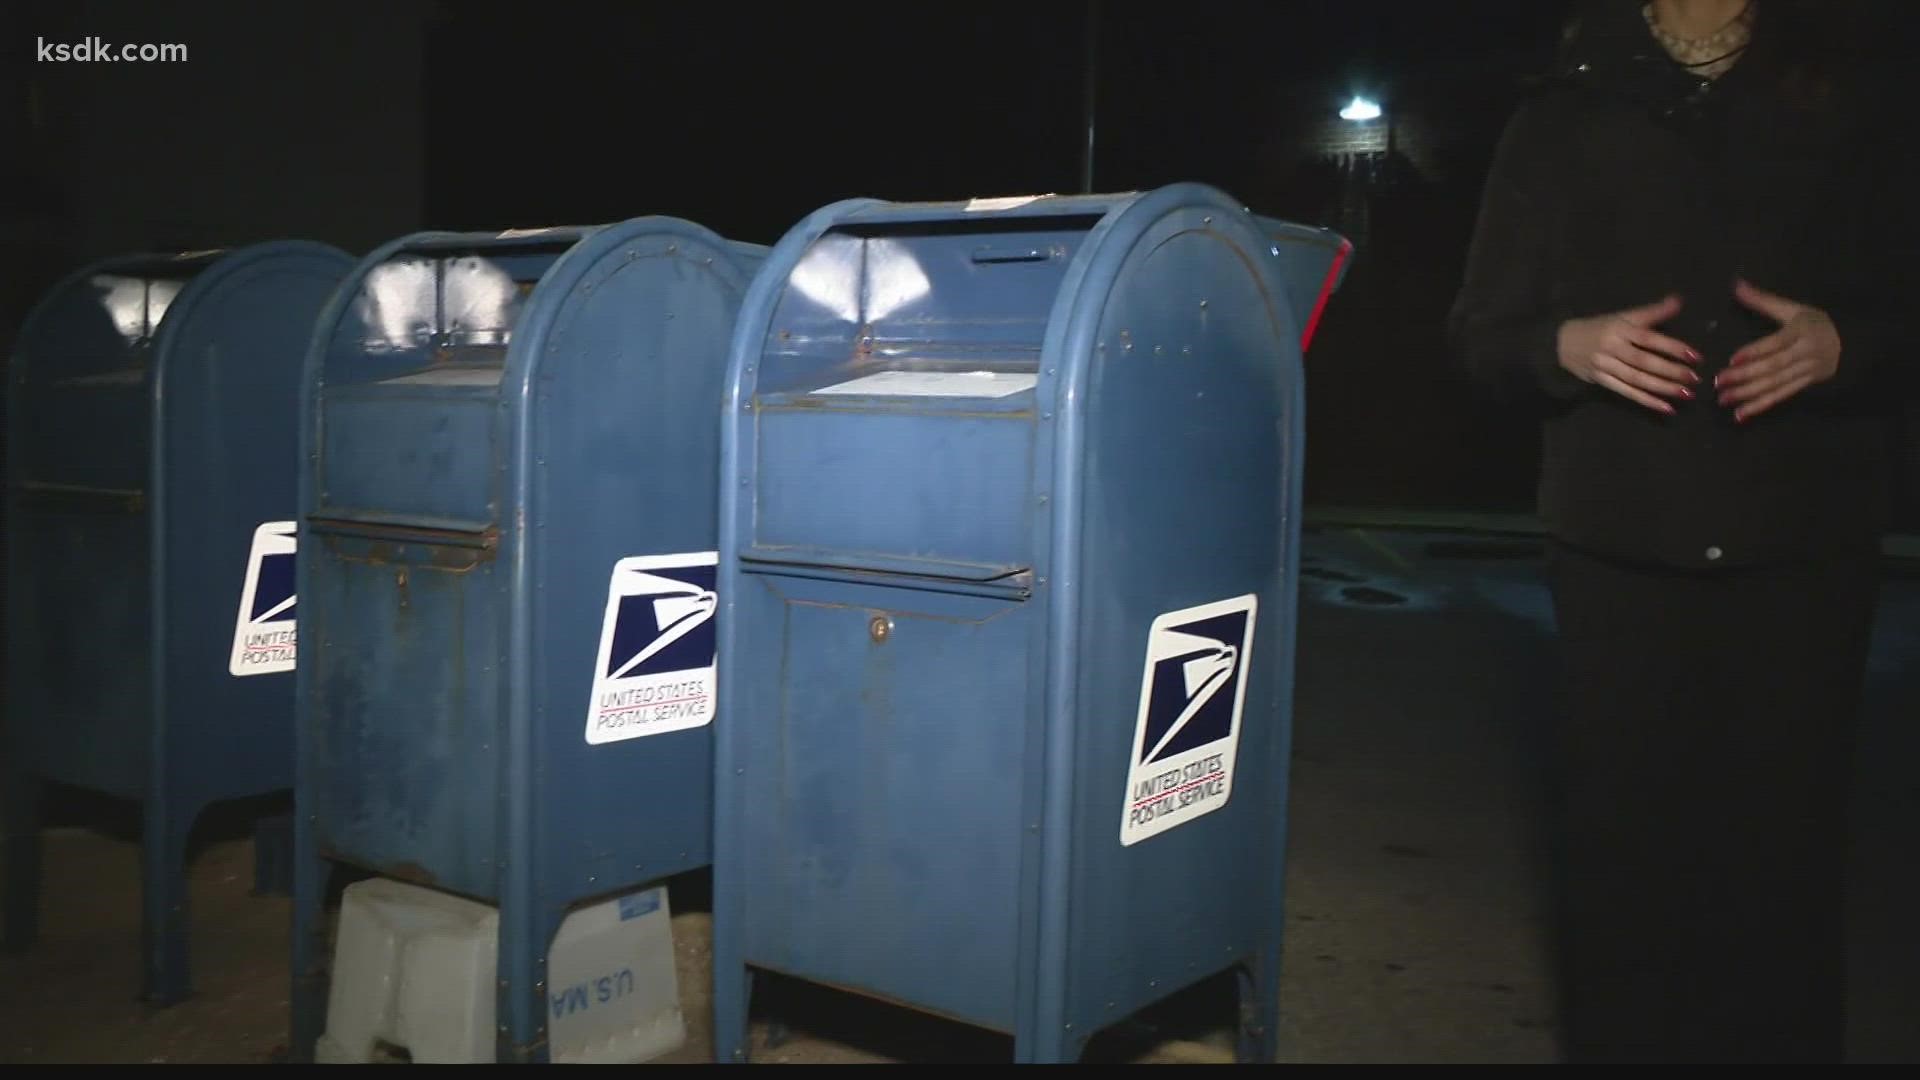 The United States Postal Service says the pandemic impacted their workforce. They plan to continue flexing available resources to match the workload.